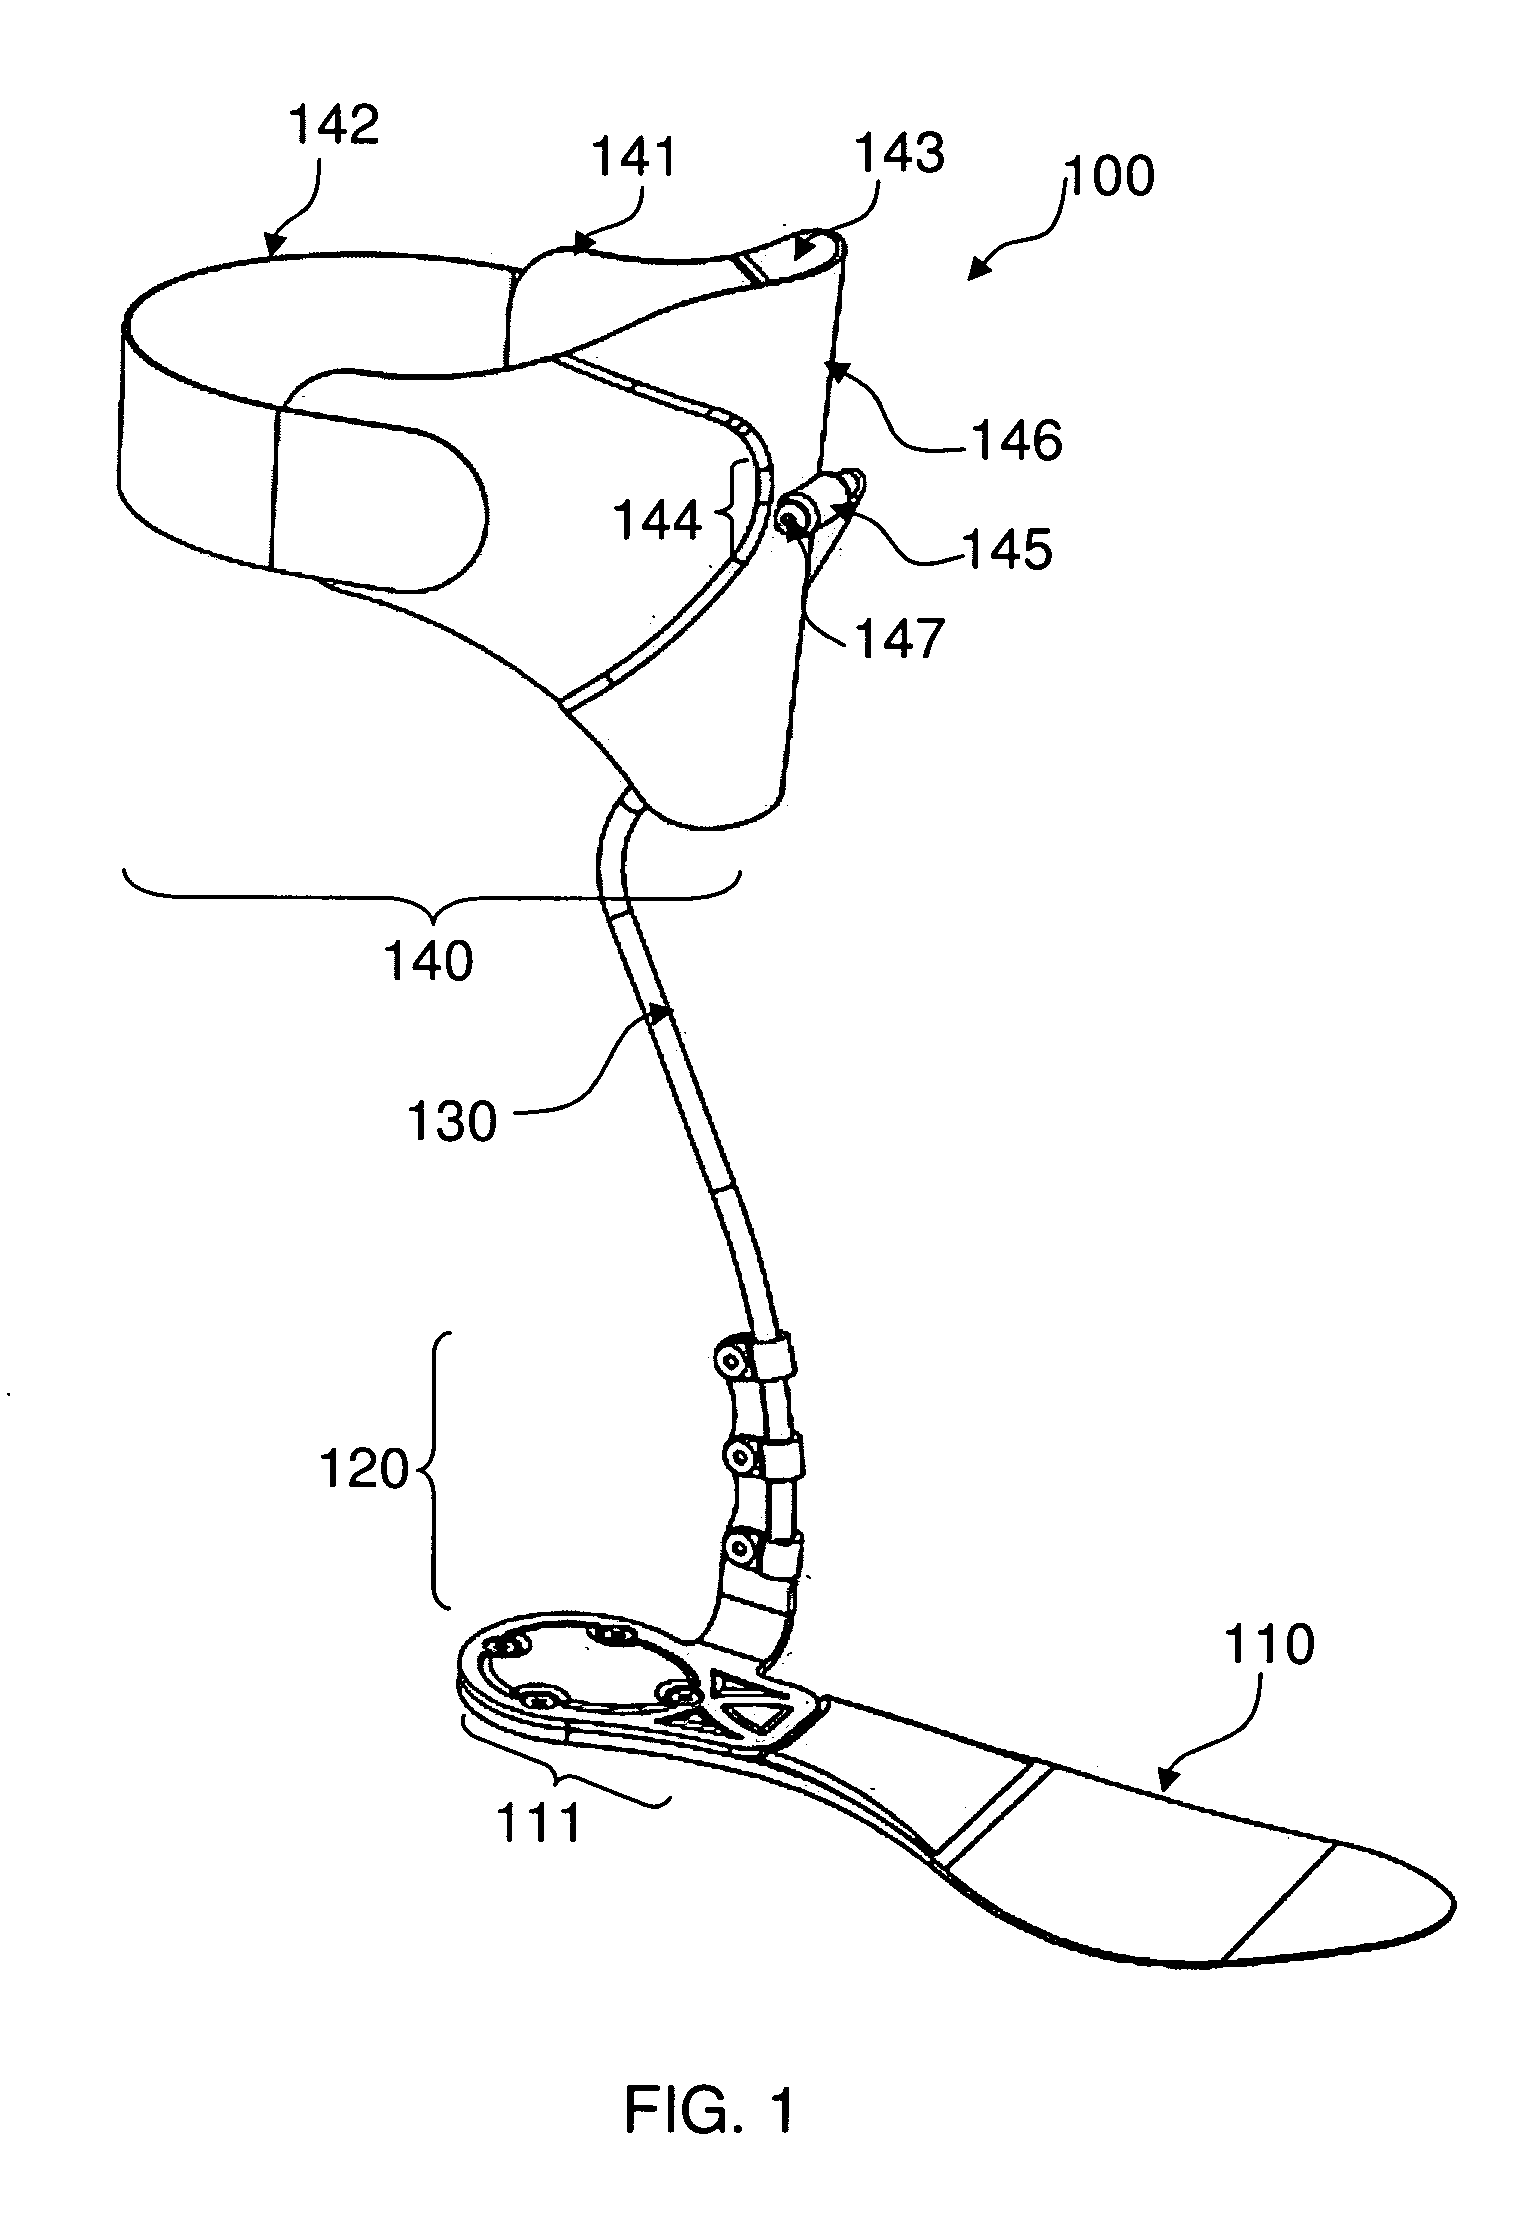 Ankle Foot Orthosis Device